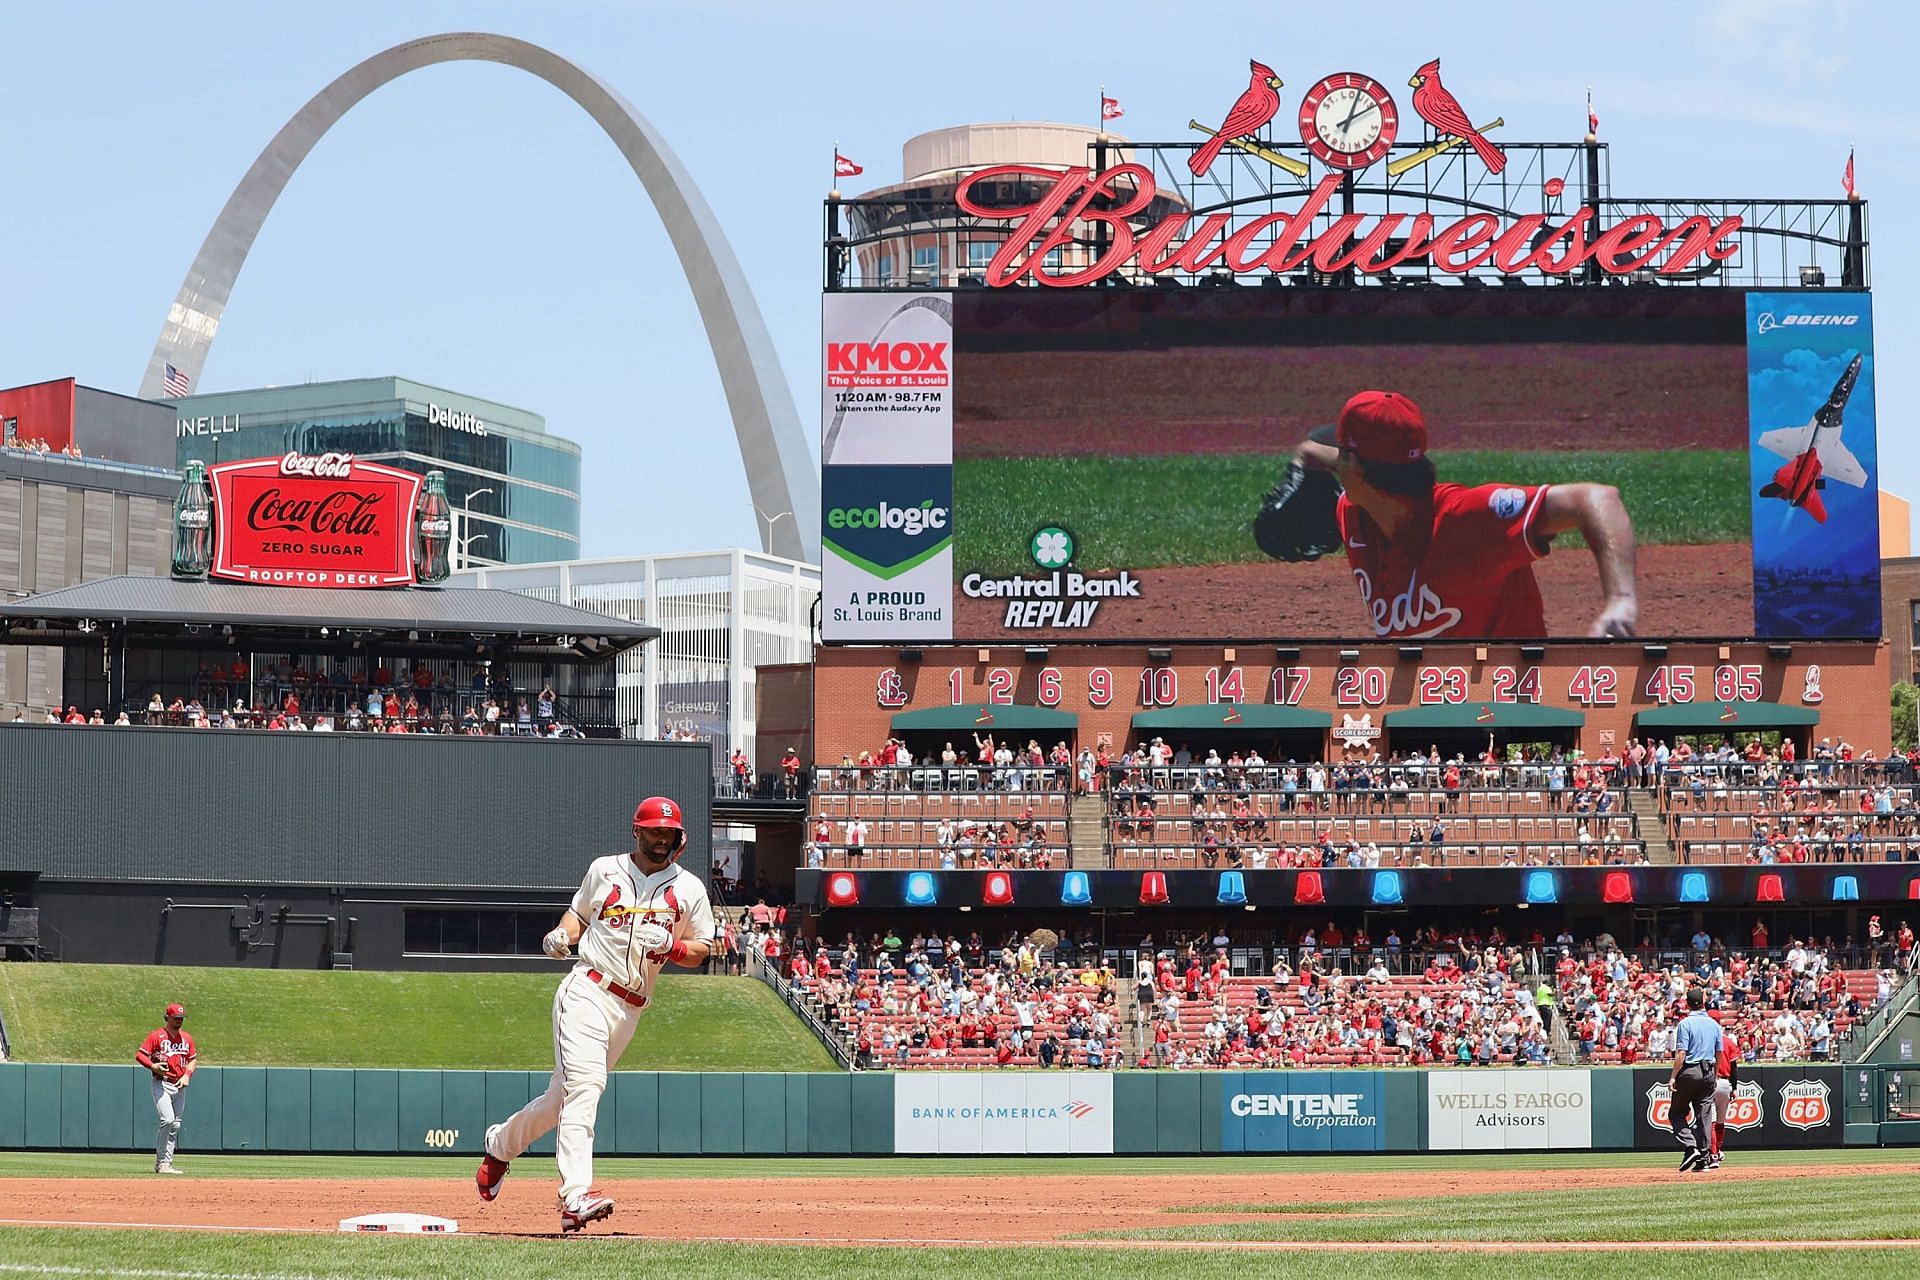 Official Release from Major League Baseball: St. Louis Cardinals and San  Francisco Giants to play at Rickwood Field in 2024 « The Official Website  for the City of Birmingham, Alabama